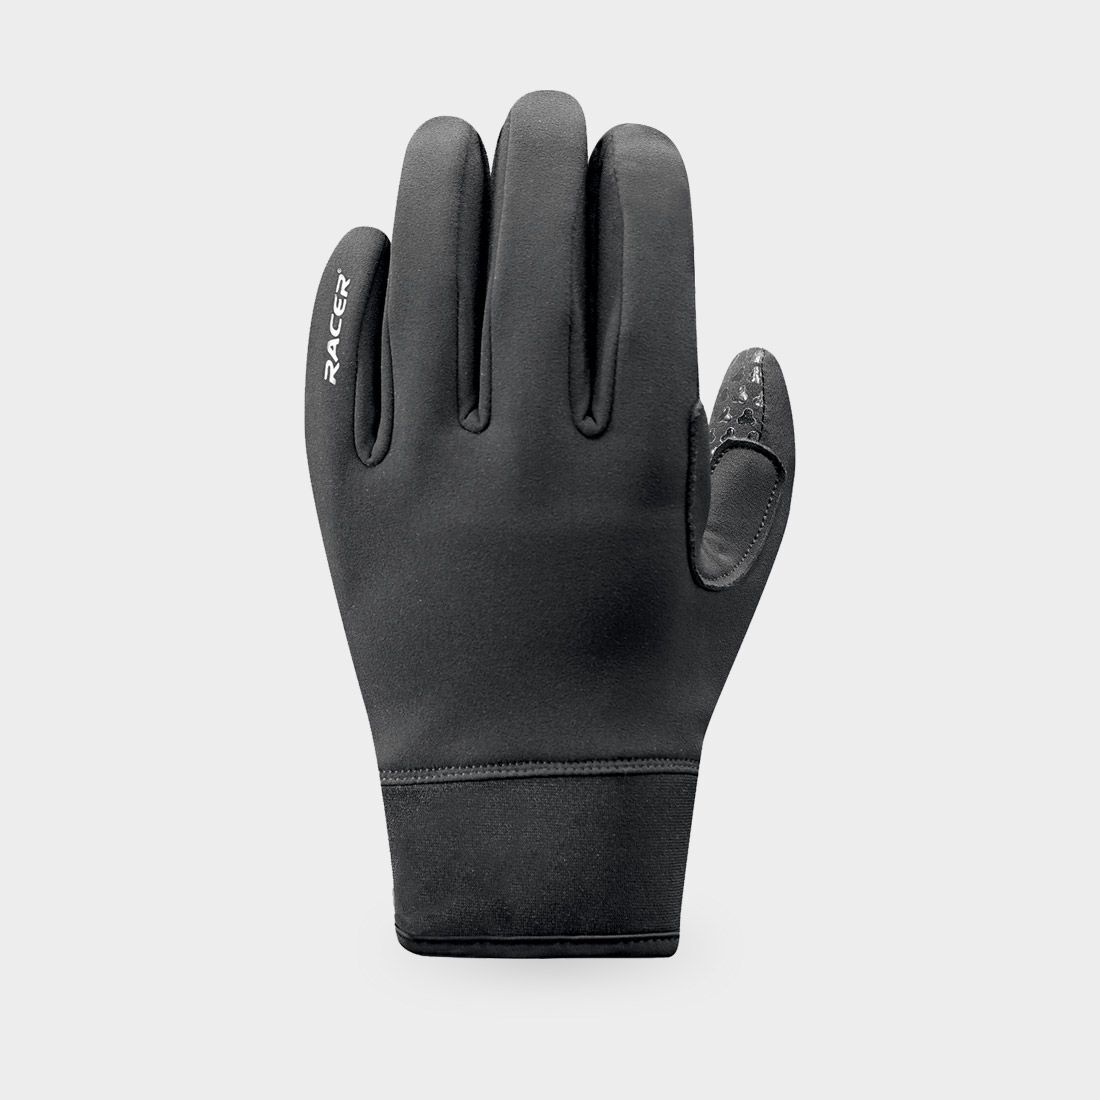 Racer Alpin - Guantes ciclismo